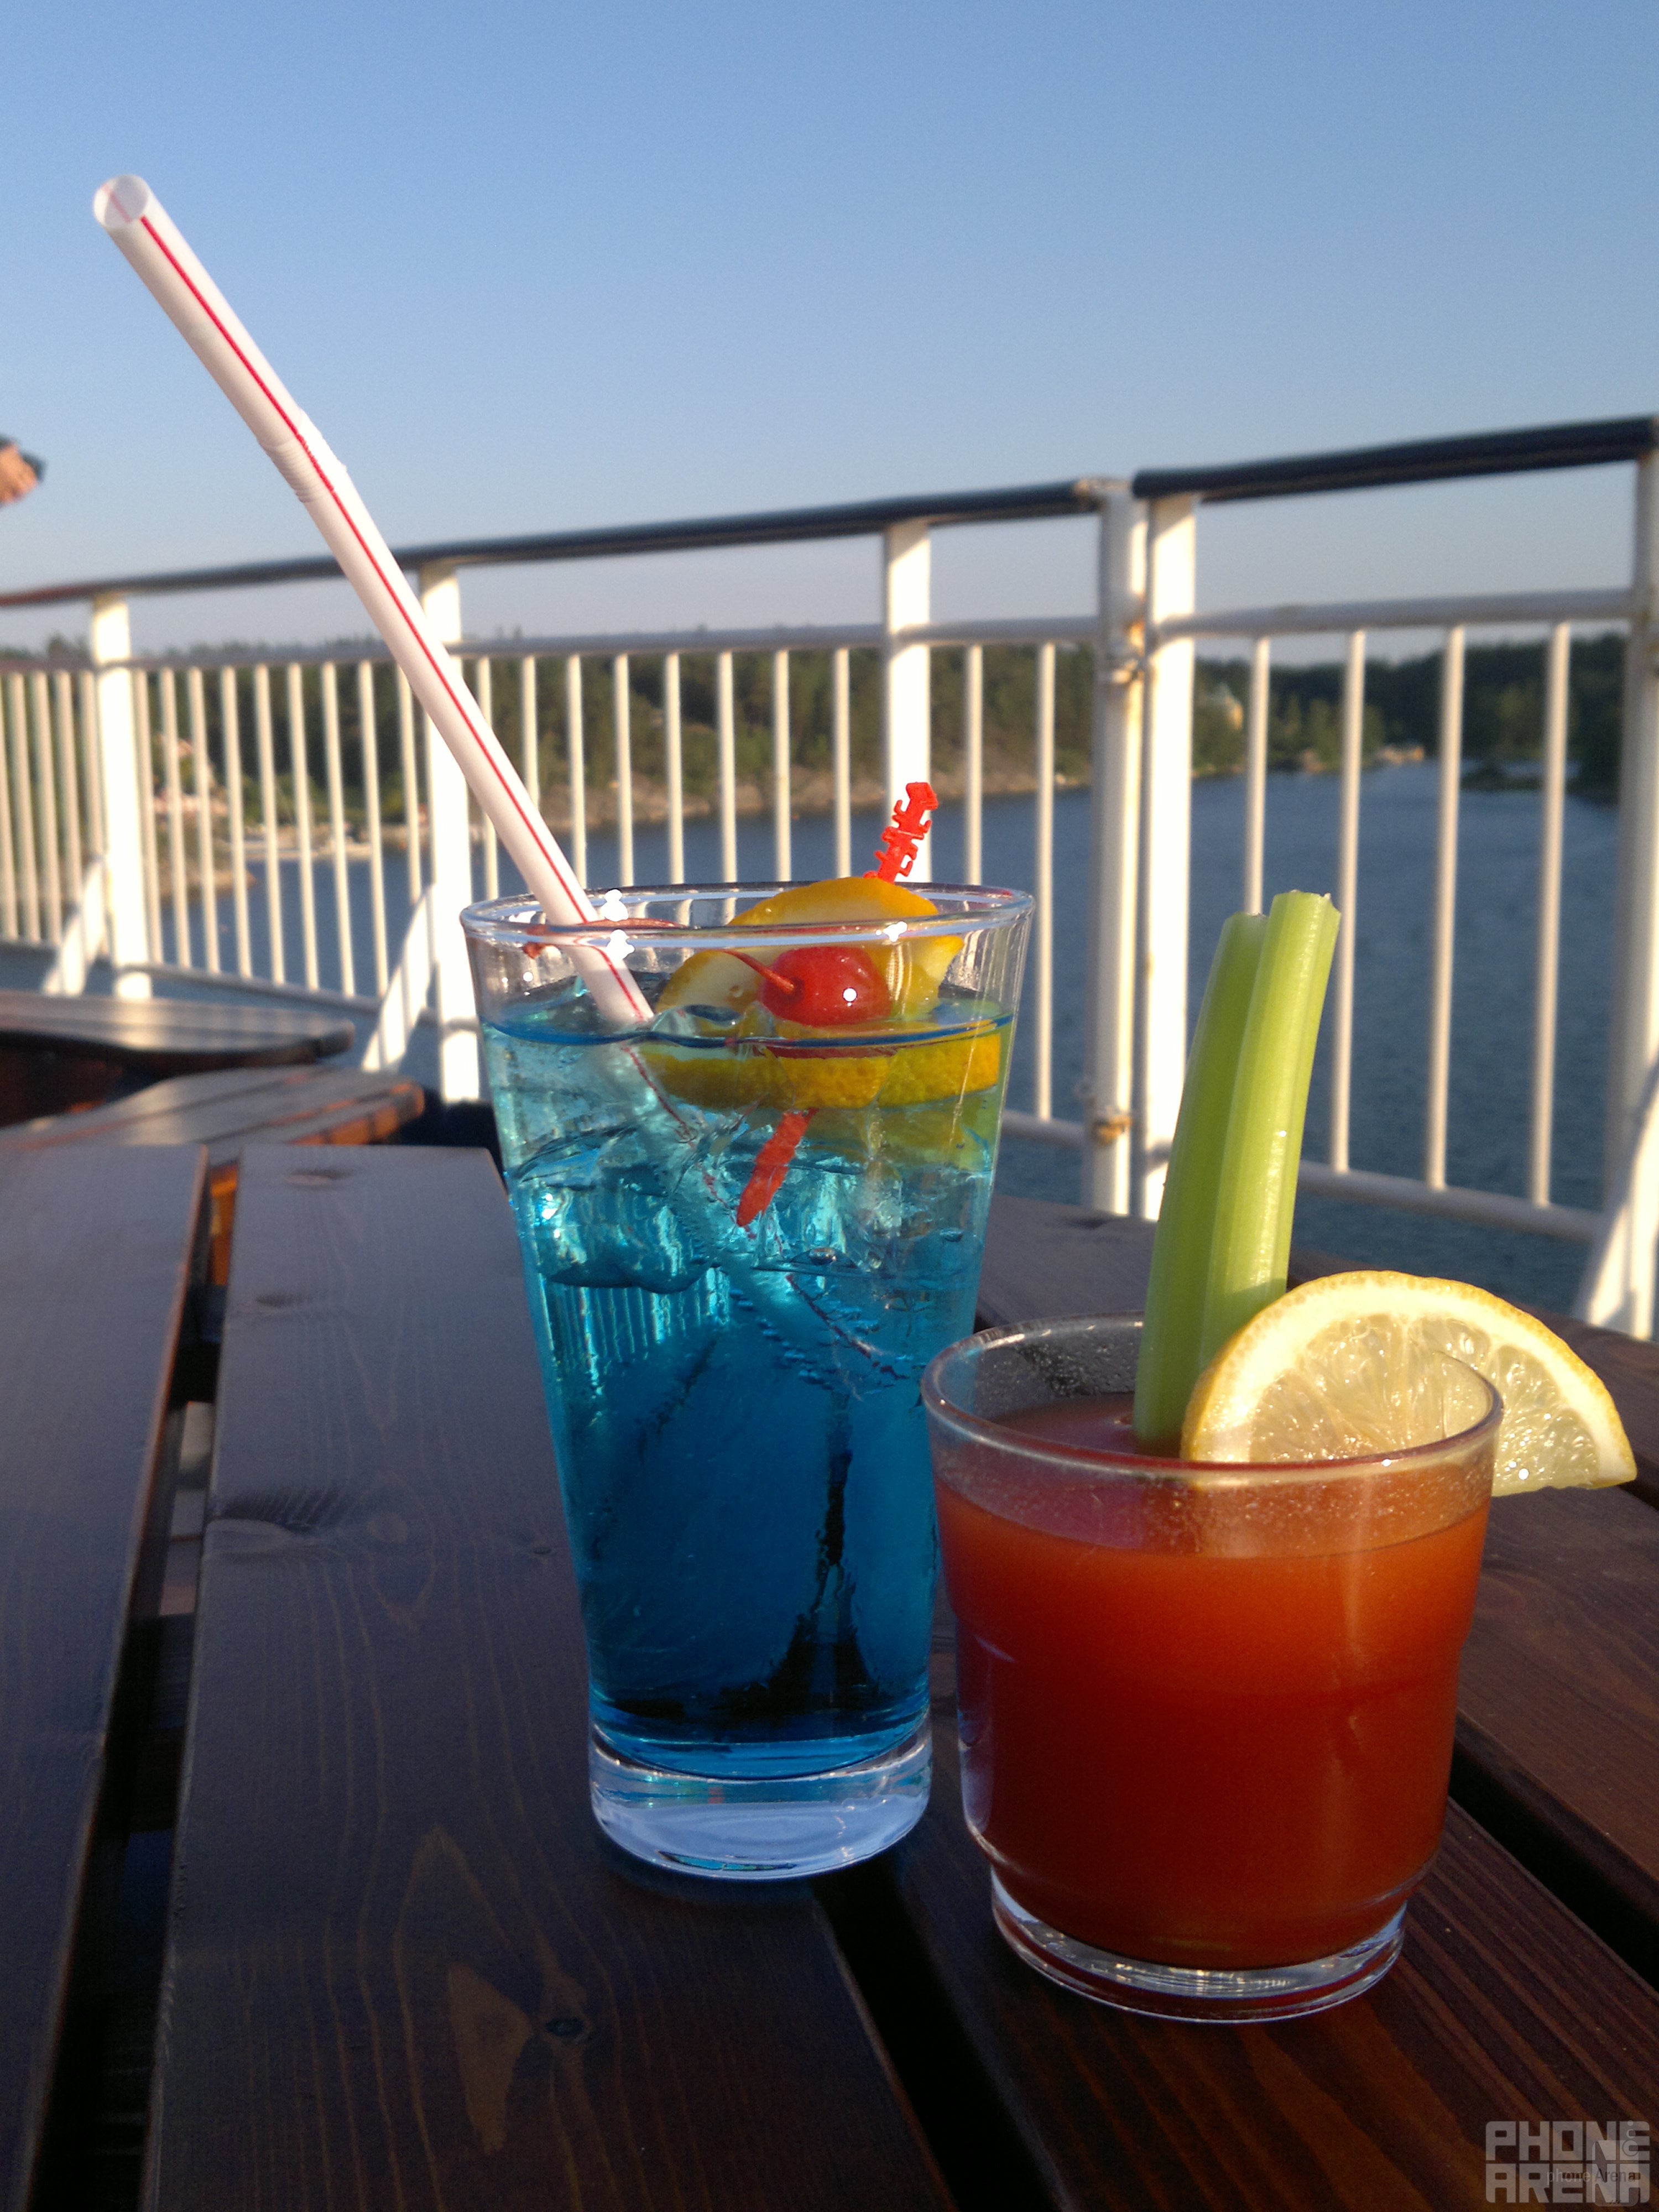 esbo - Nokia N8Blue Angel and Bloody Mary(last time&#039;s winner) - Cool images, taken with your cell phone #26